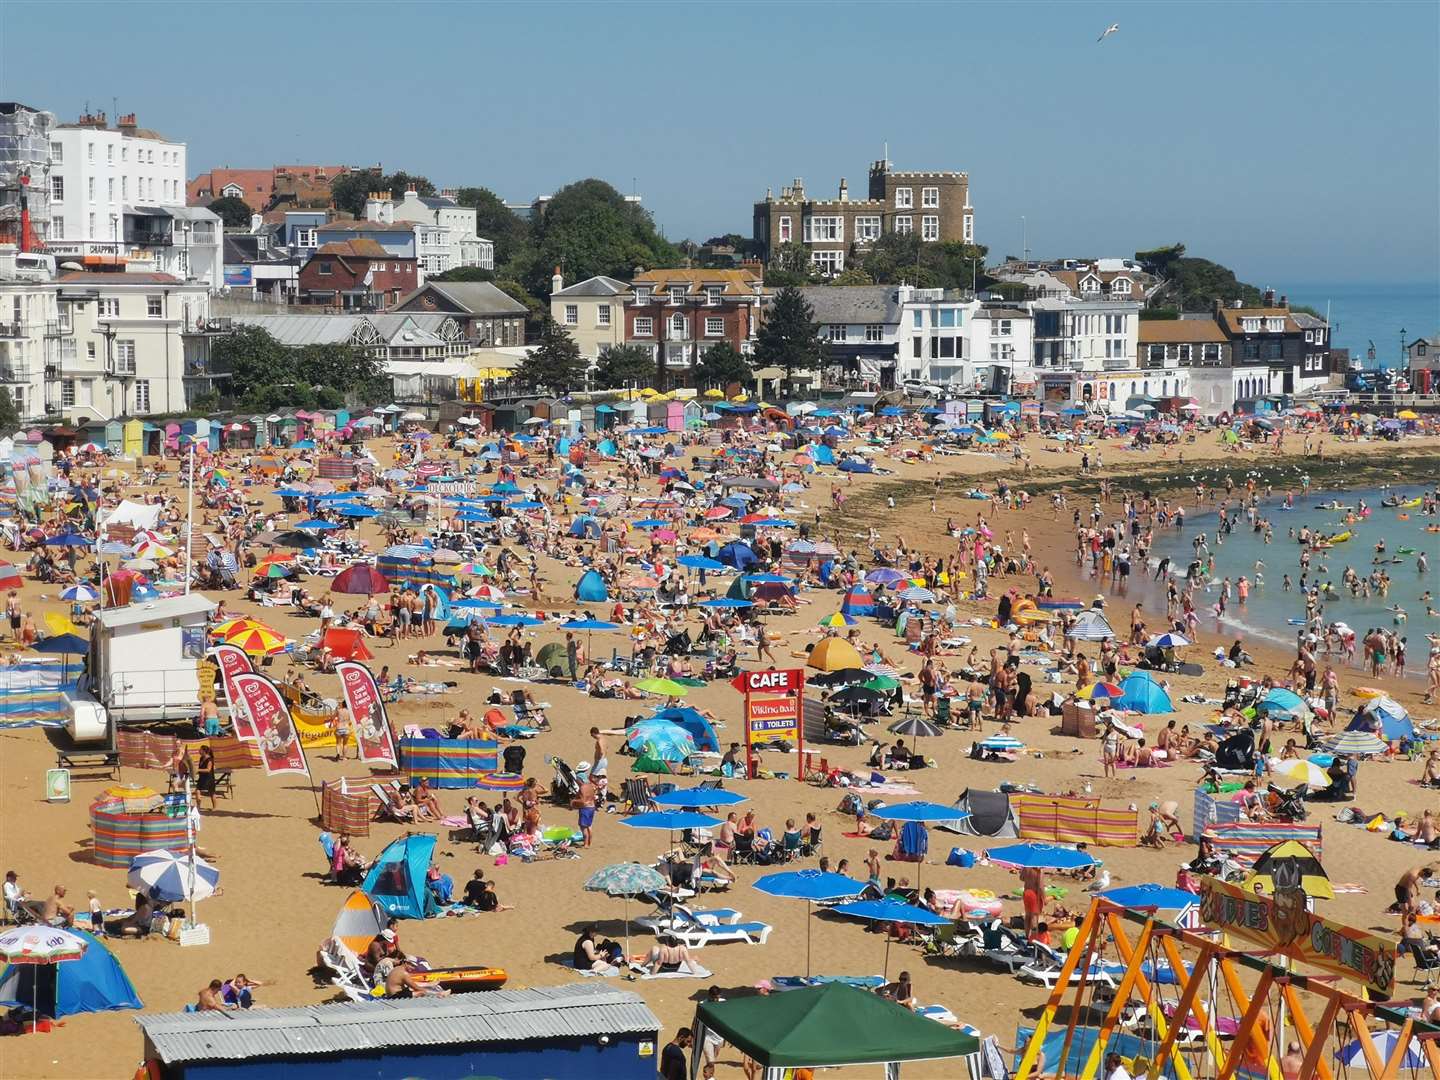 Crowds packed onto Thanet beaches in the heatwave last Friday